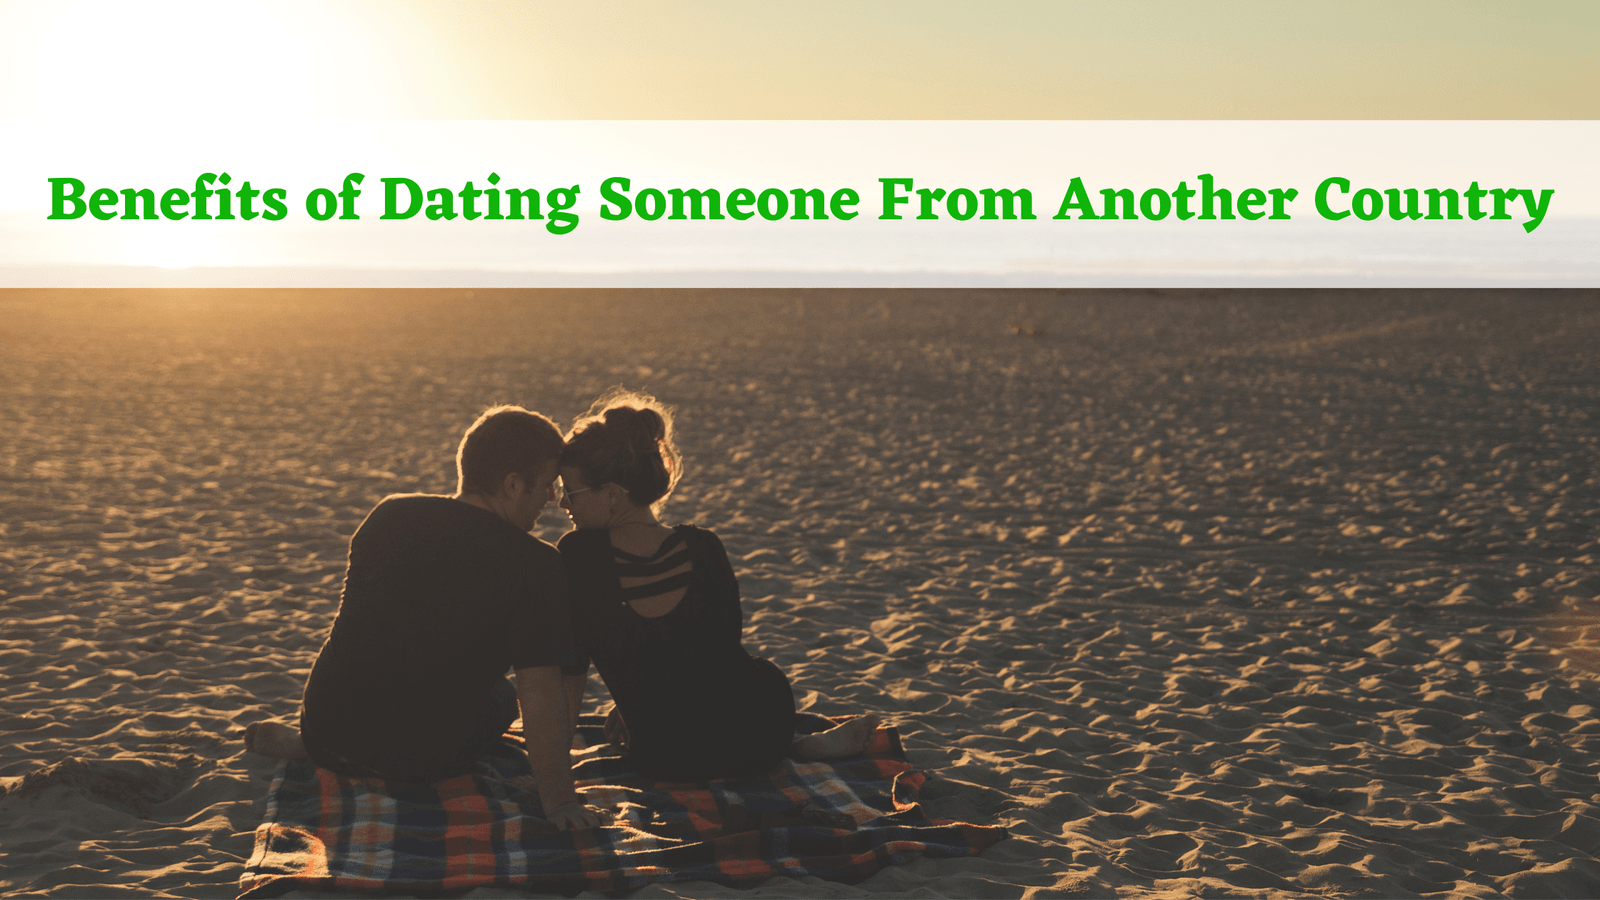 Benefits of Dating Someone From Another Country